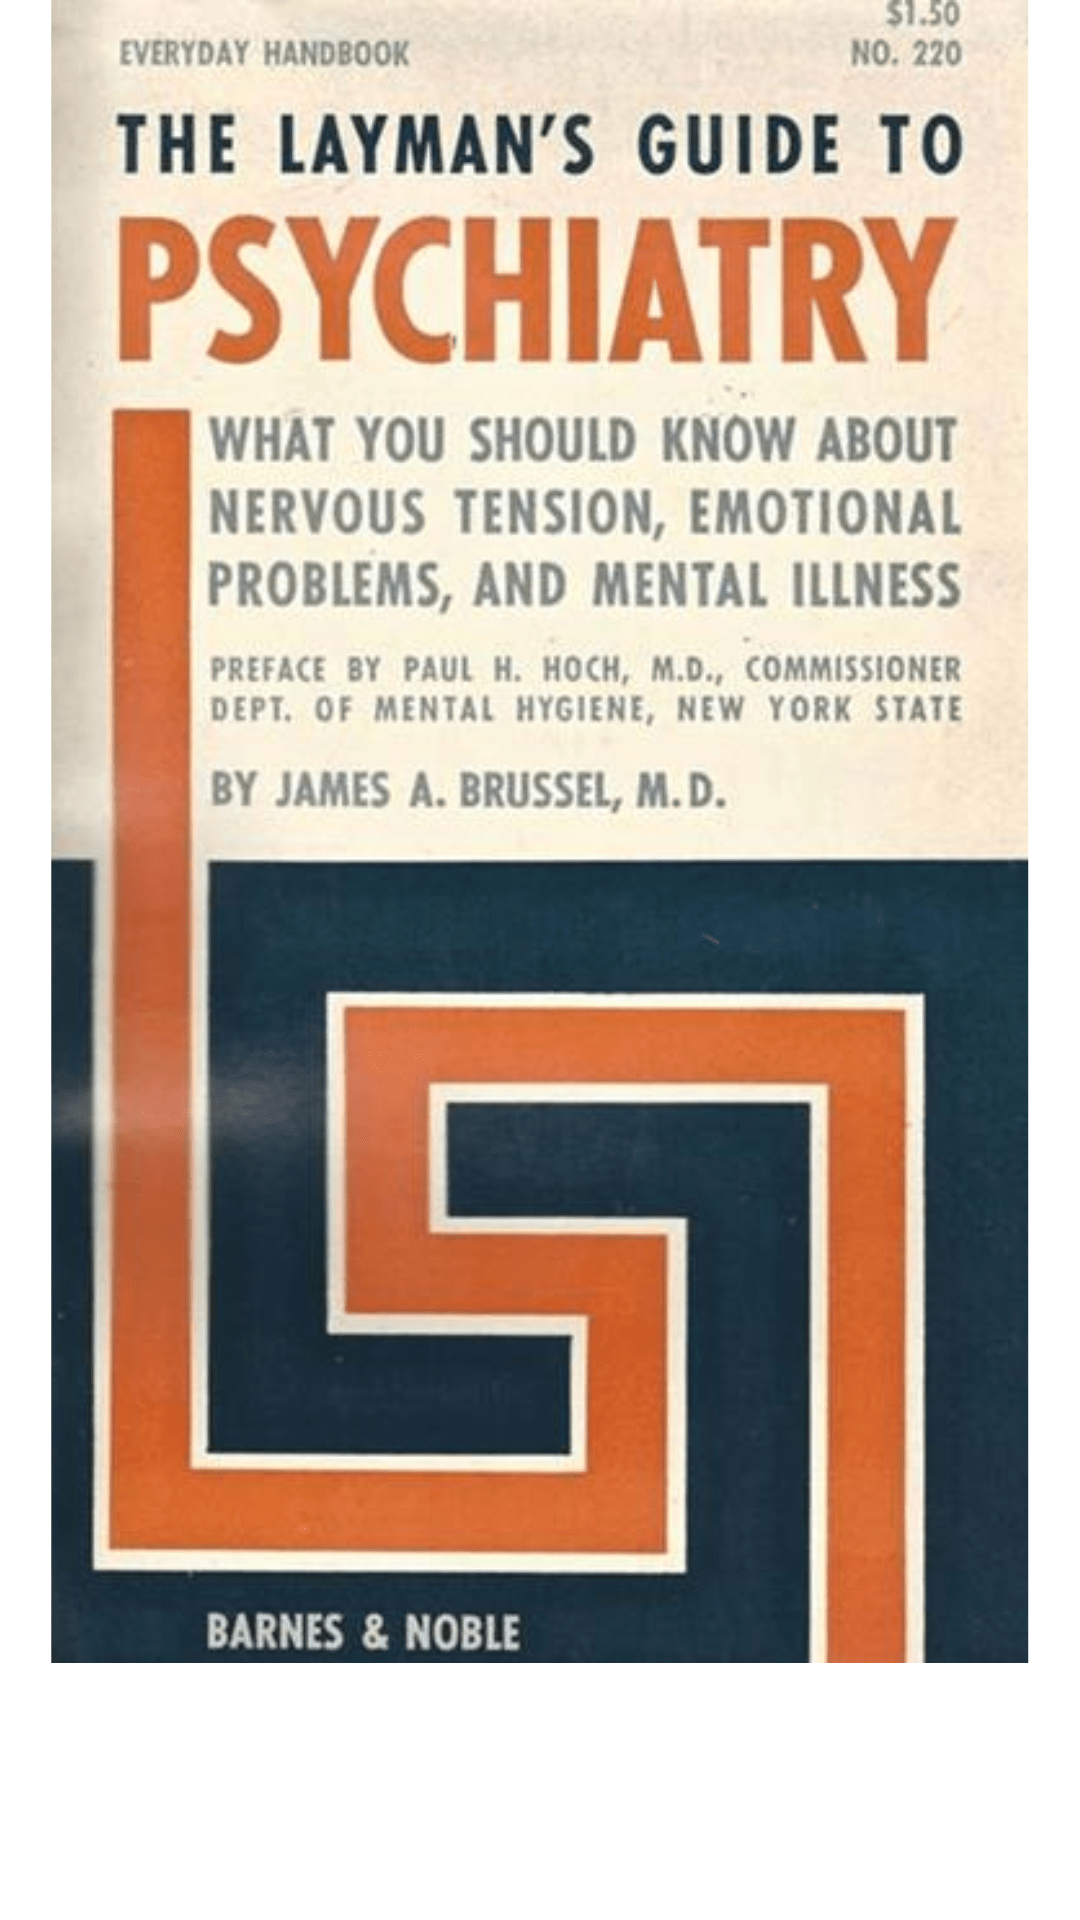 The Layman's Guide to Psychiatry